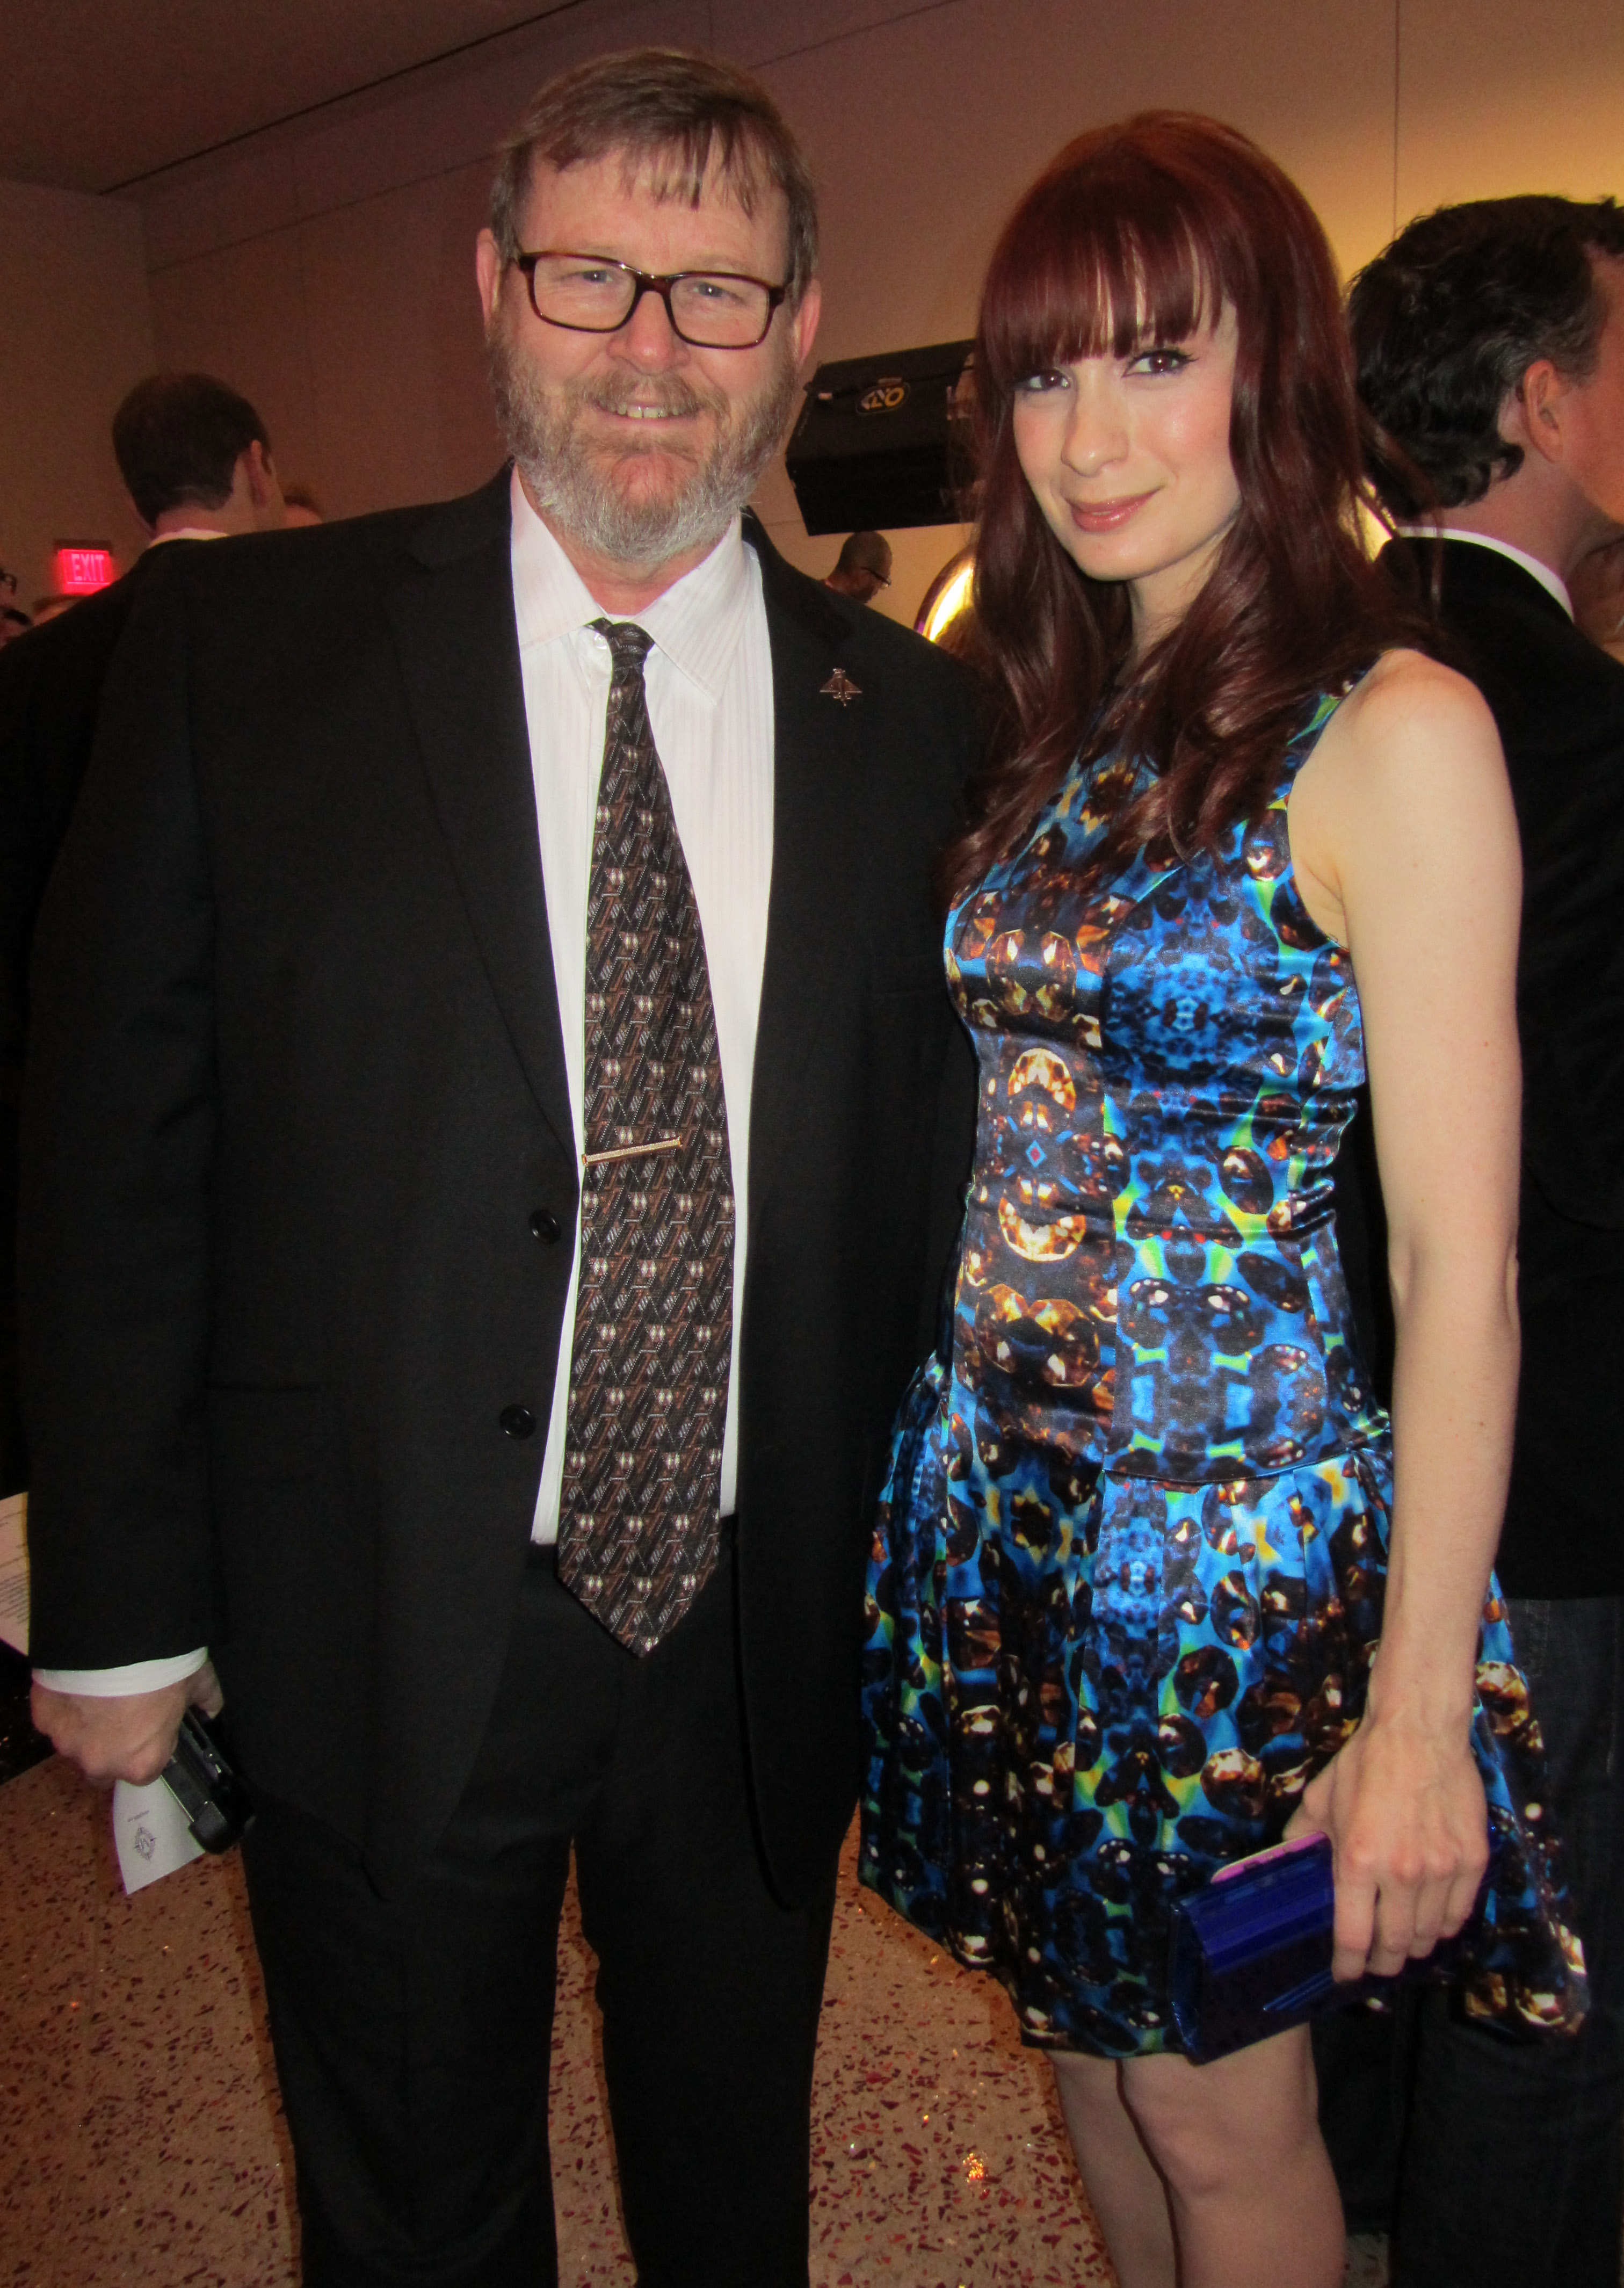 Gregory Schmauss and Felicia Day at the 2013 International Academy of Web Television Award ceremonies, Las Vegas, Nevada.